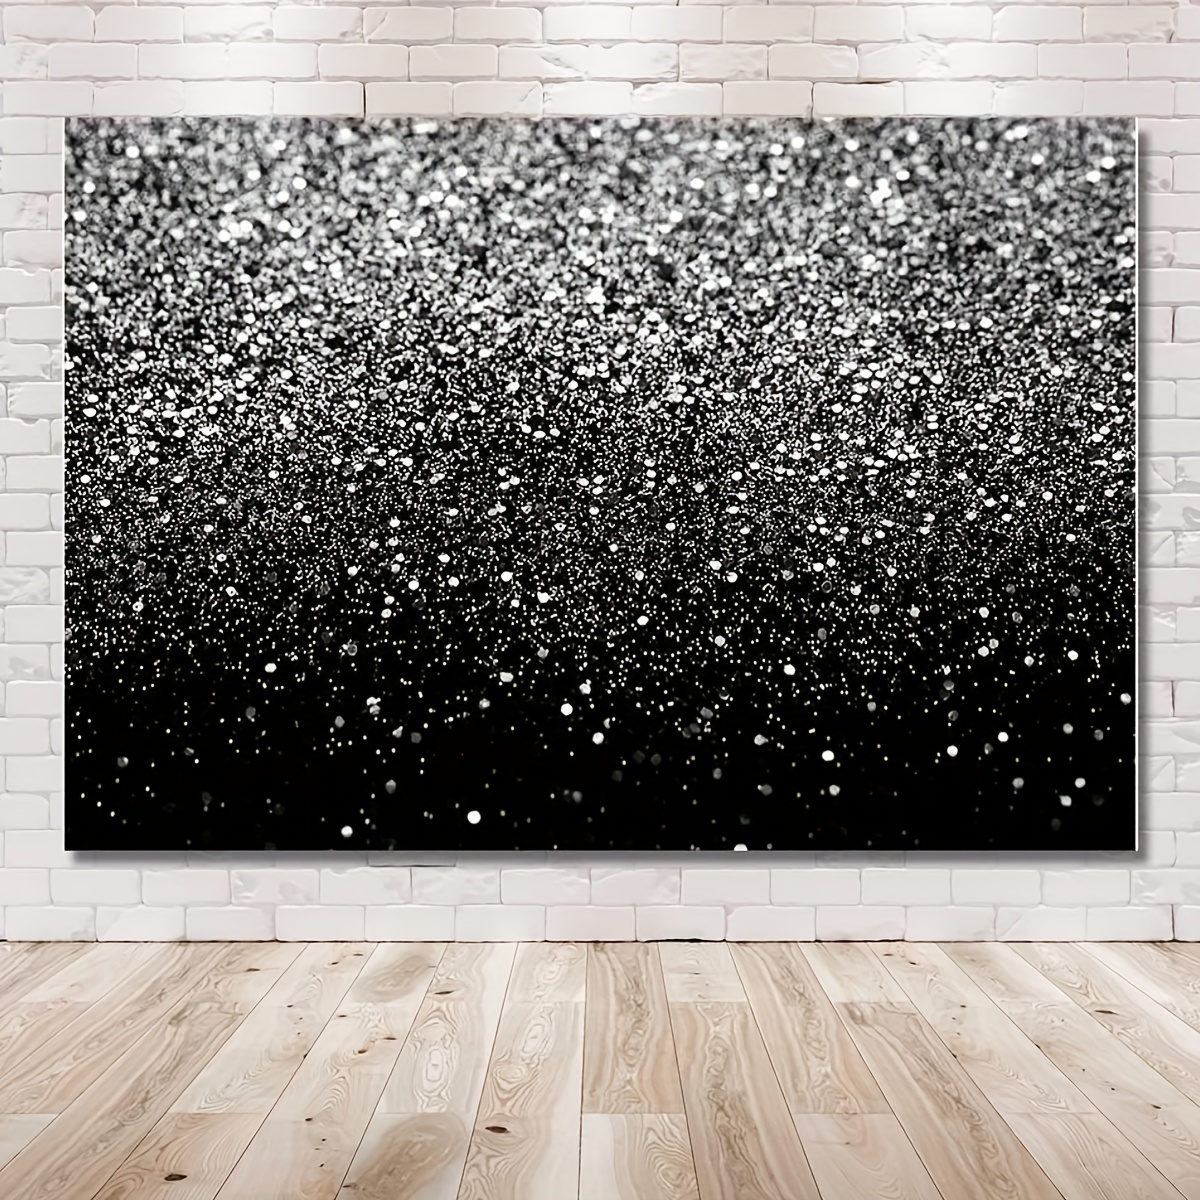 Black glitter sparkle texture background, abstract decoration and